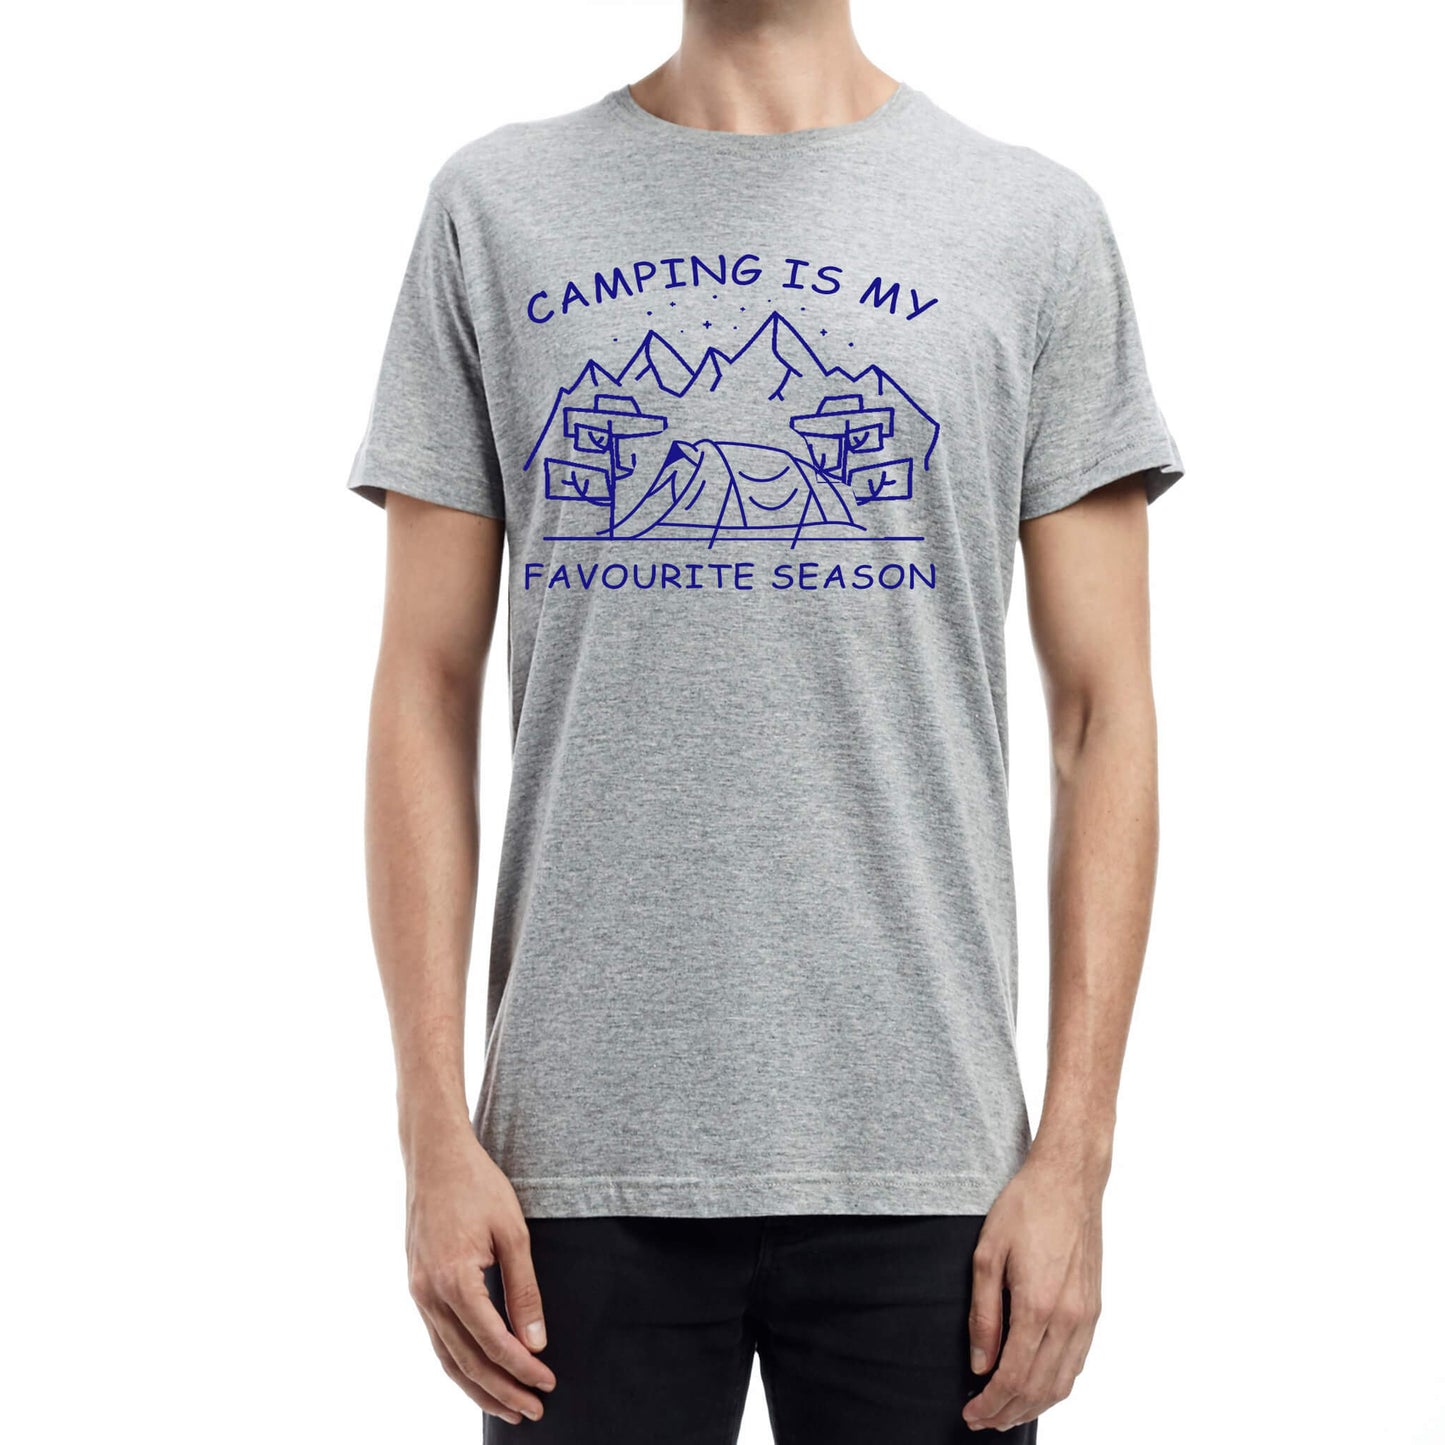  "grey Graphic tee with an illustration of a tent, surrounded by nature. Text reads: 'Camping is my favorite season.' Celebrate the great outdoors!"